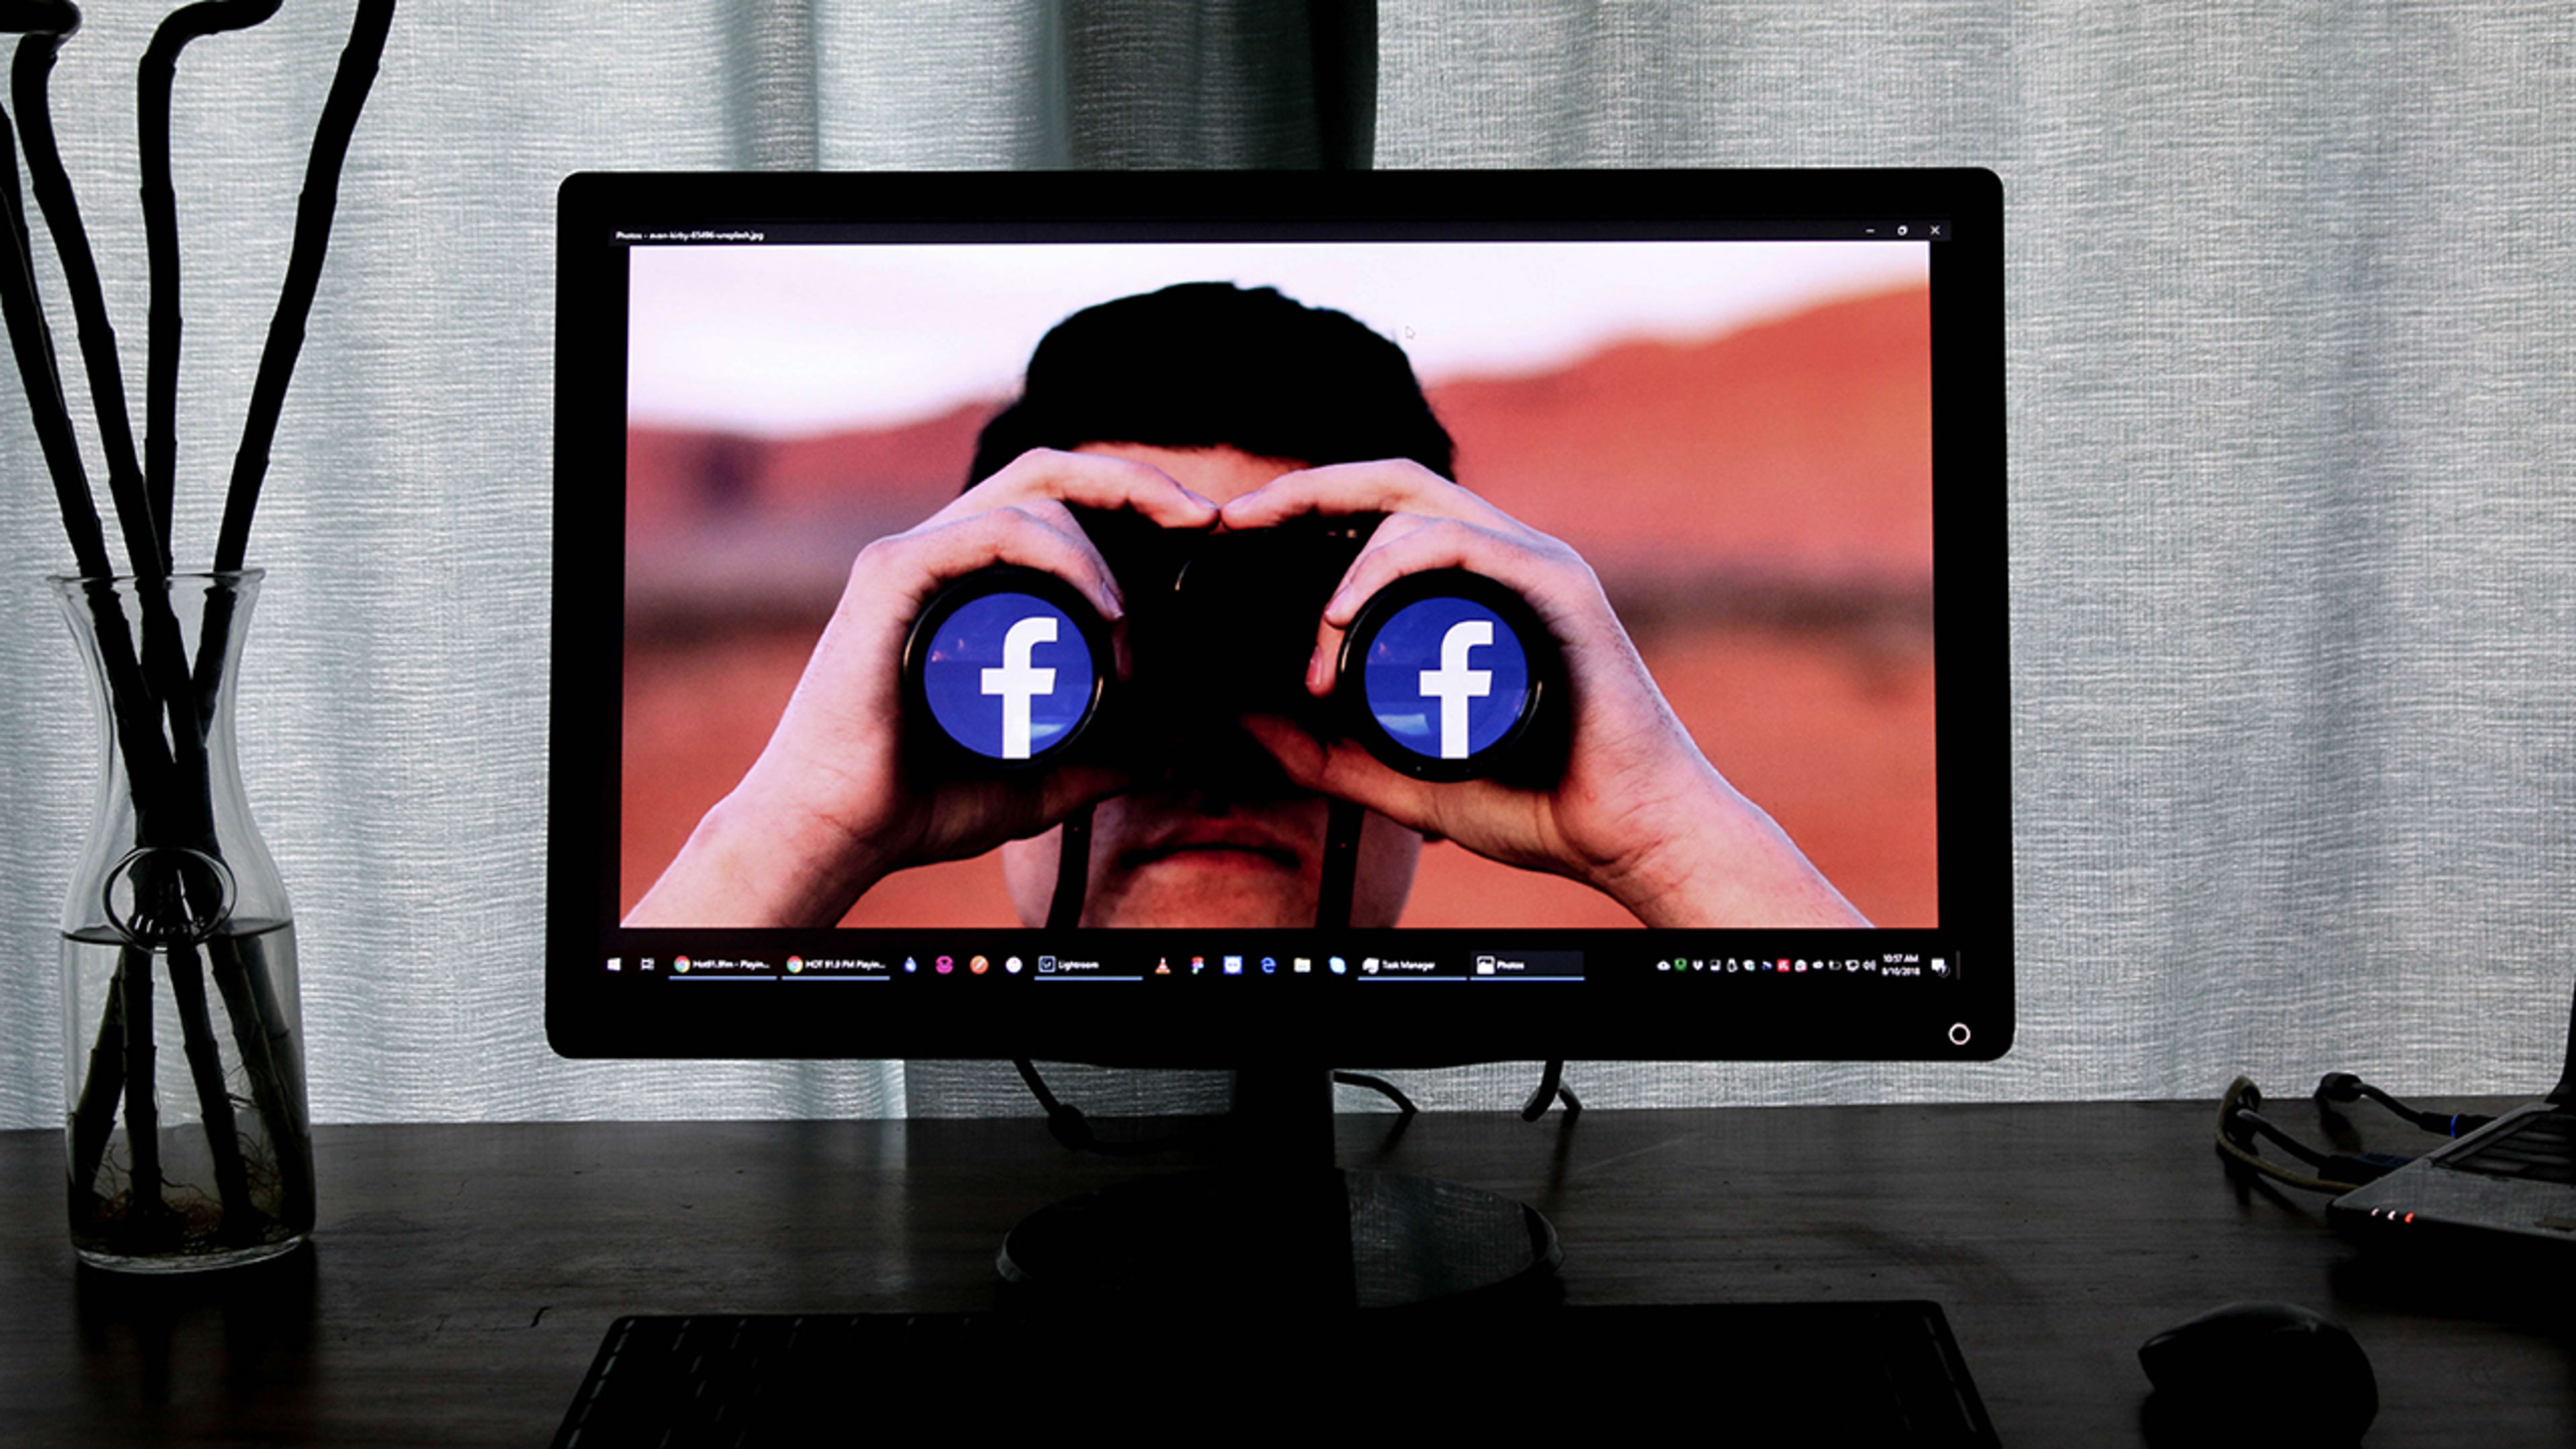 Facebook’s new shows may actually get you on Facebook Watch